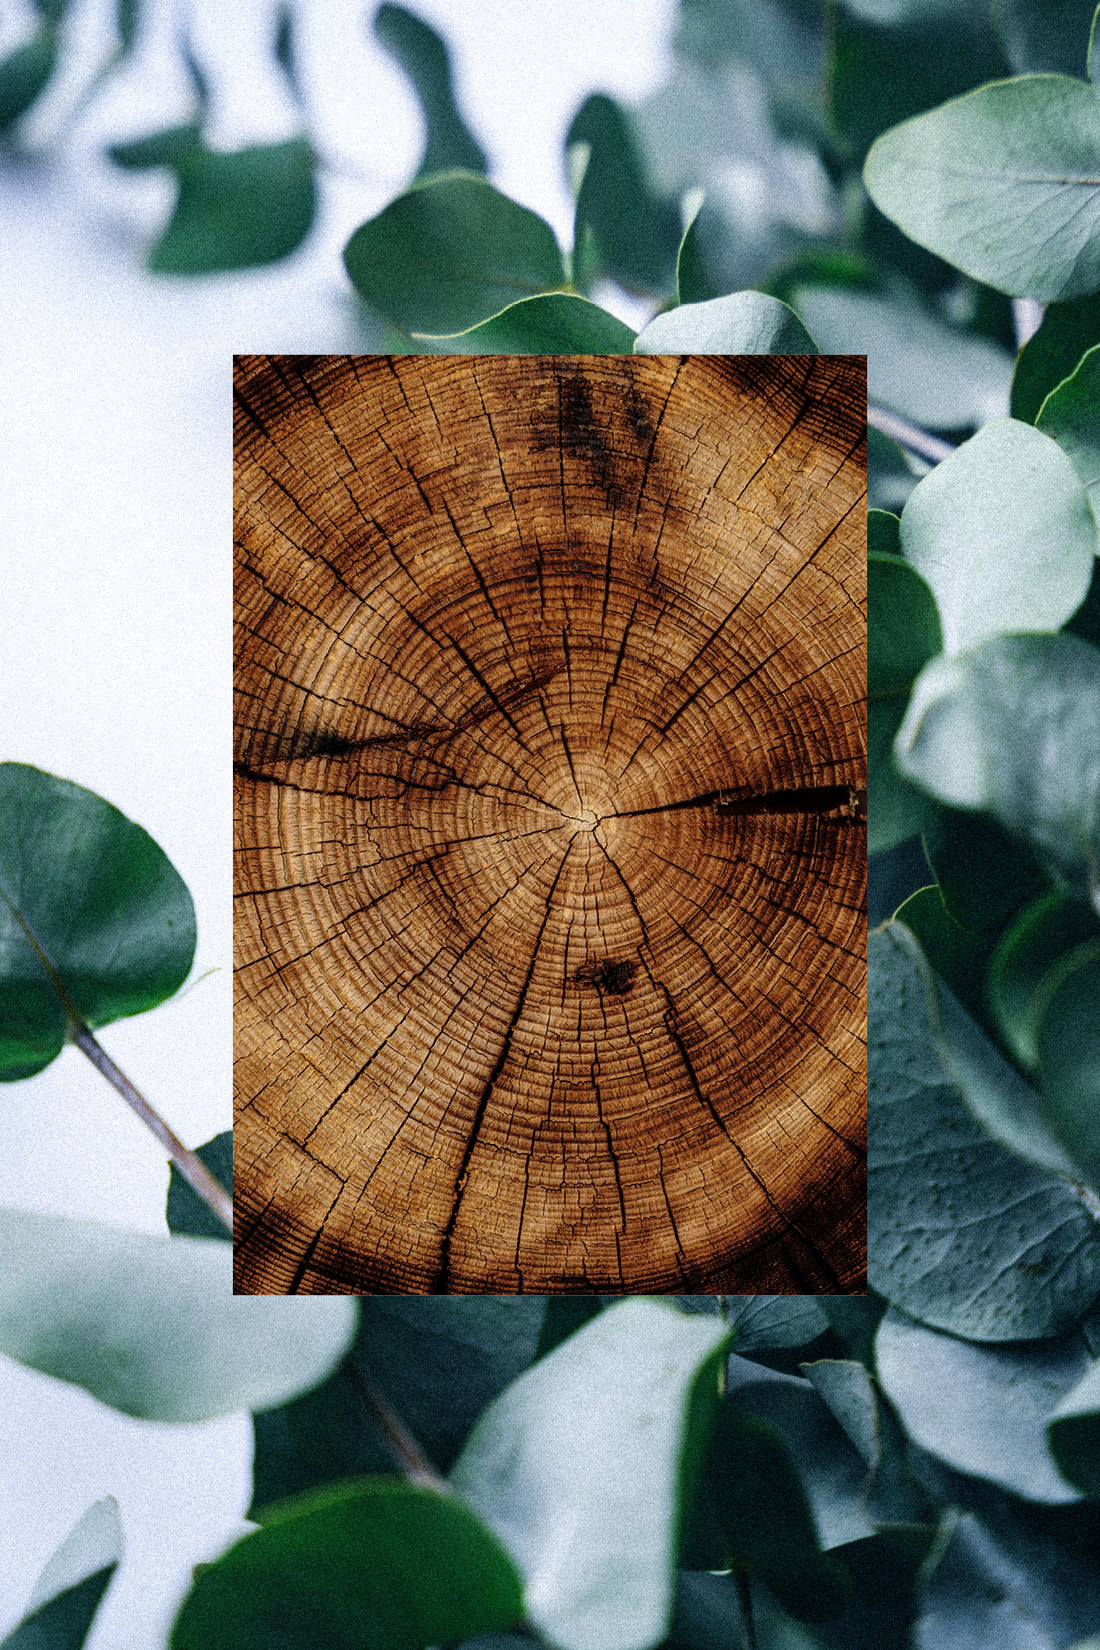 Cedar tree slice with Eucalyptus leaves + branches